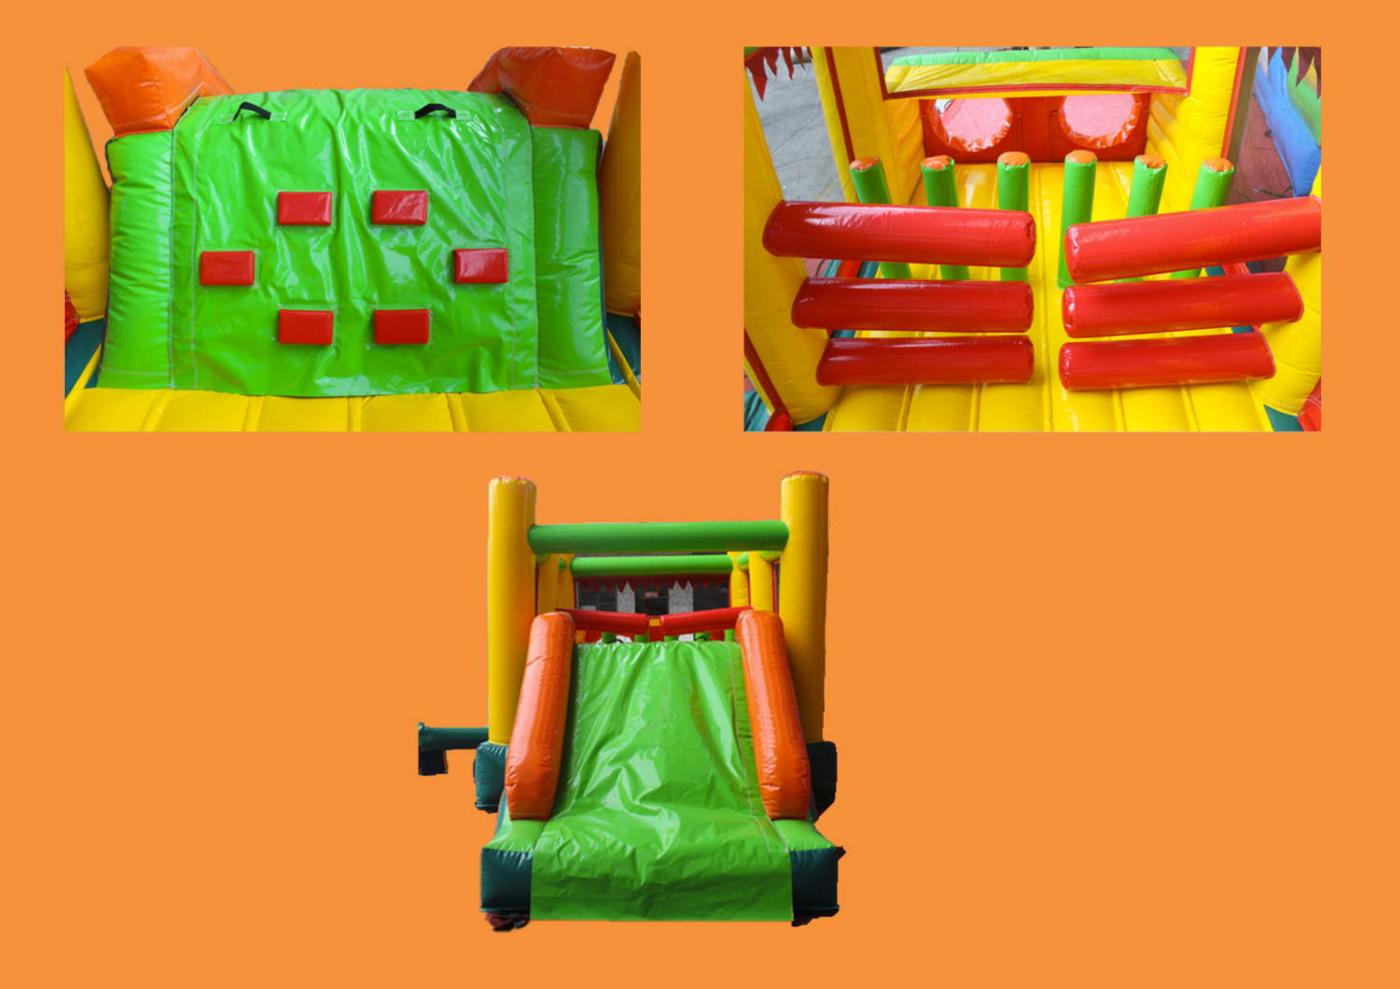 Inflable Pista American d'ús professional